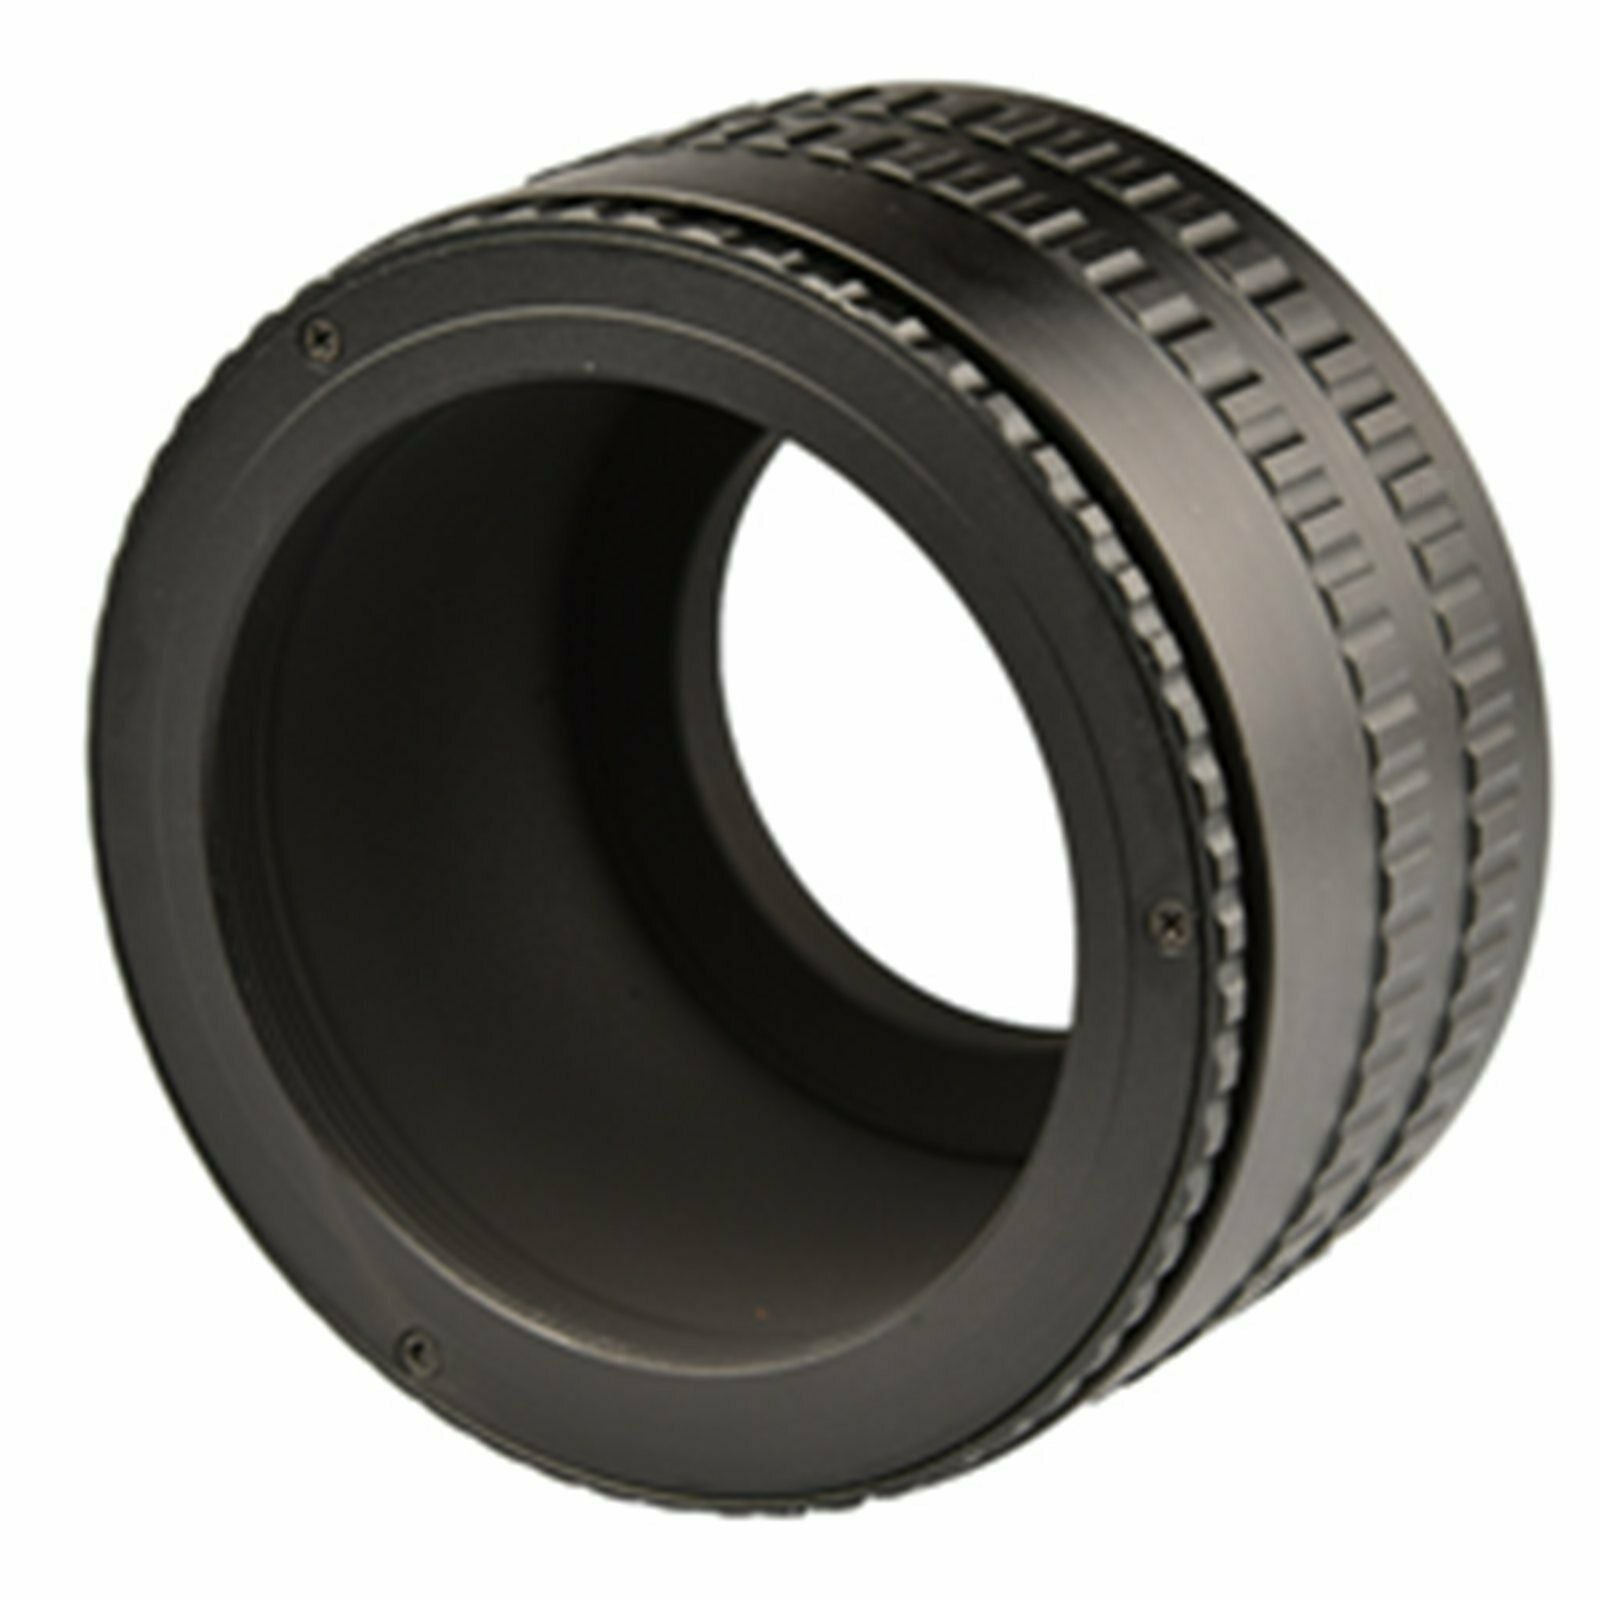 M52 to M42 Lens Rings Adapter Black Extension Manually for Photography Photo